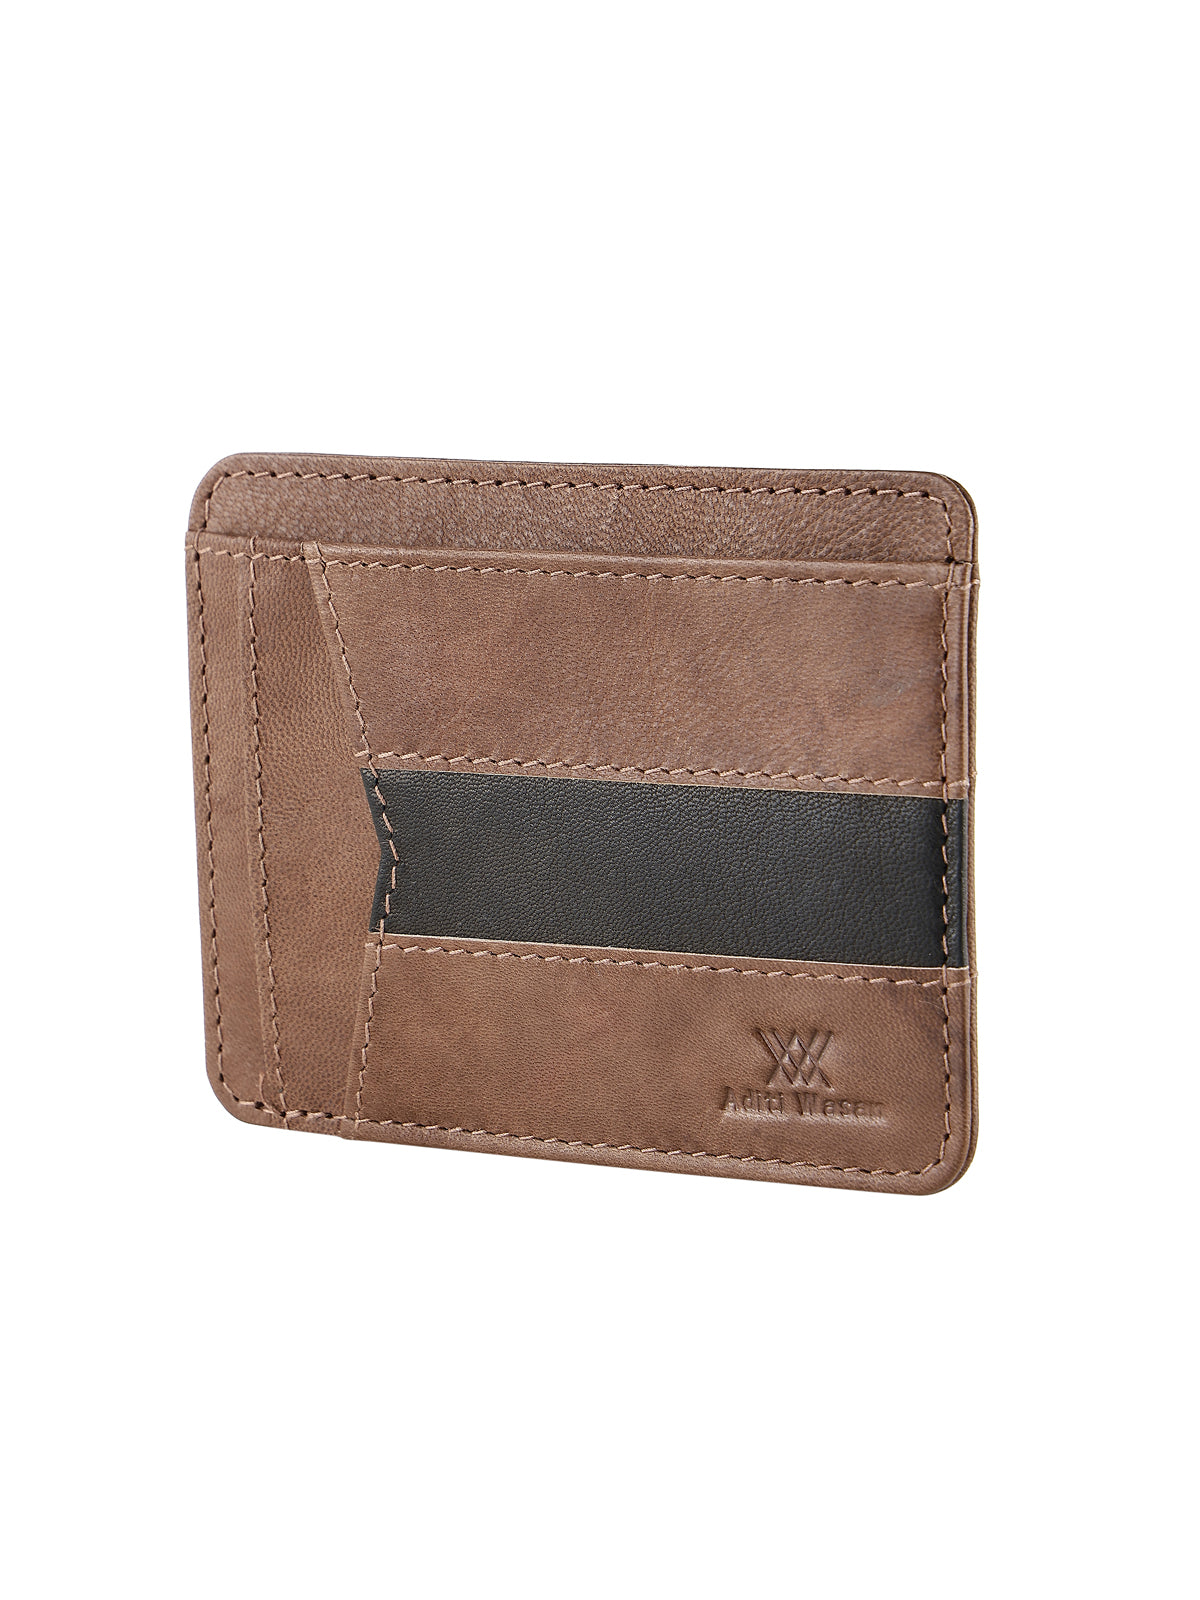 Genuine Leather Dual Tone Card Holder for Men's with Money Clip and 4 Card Holder Slot